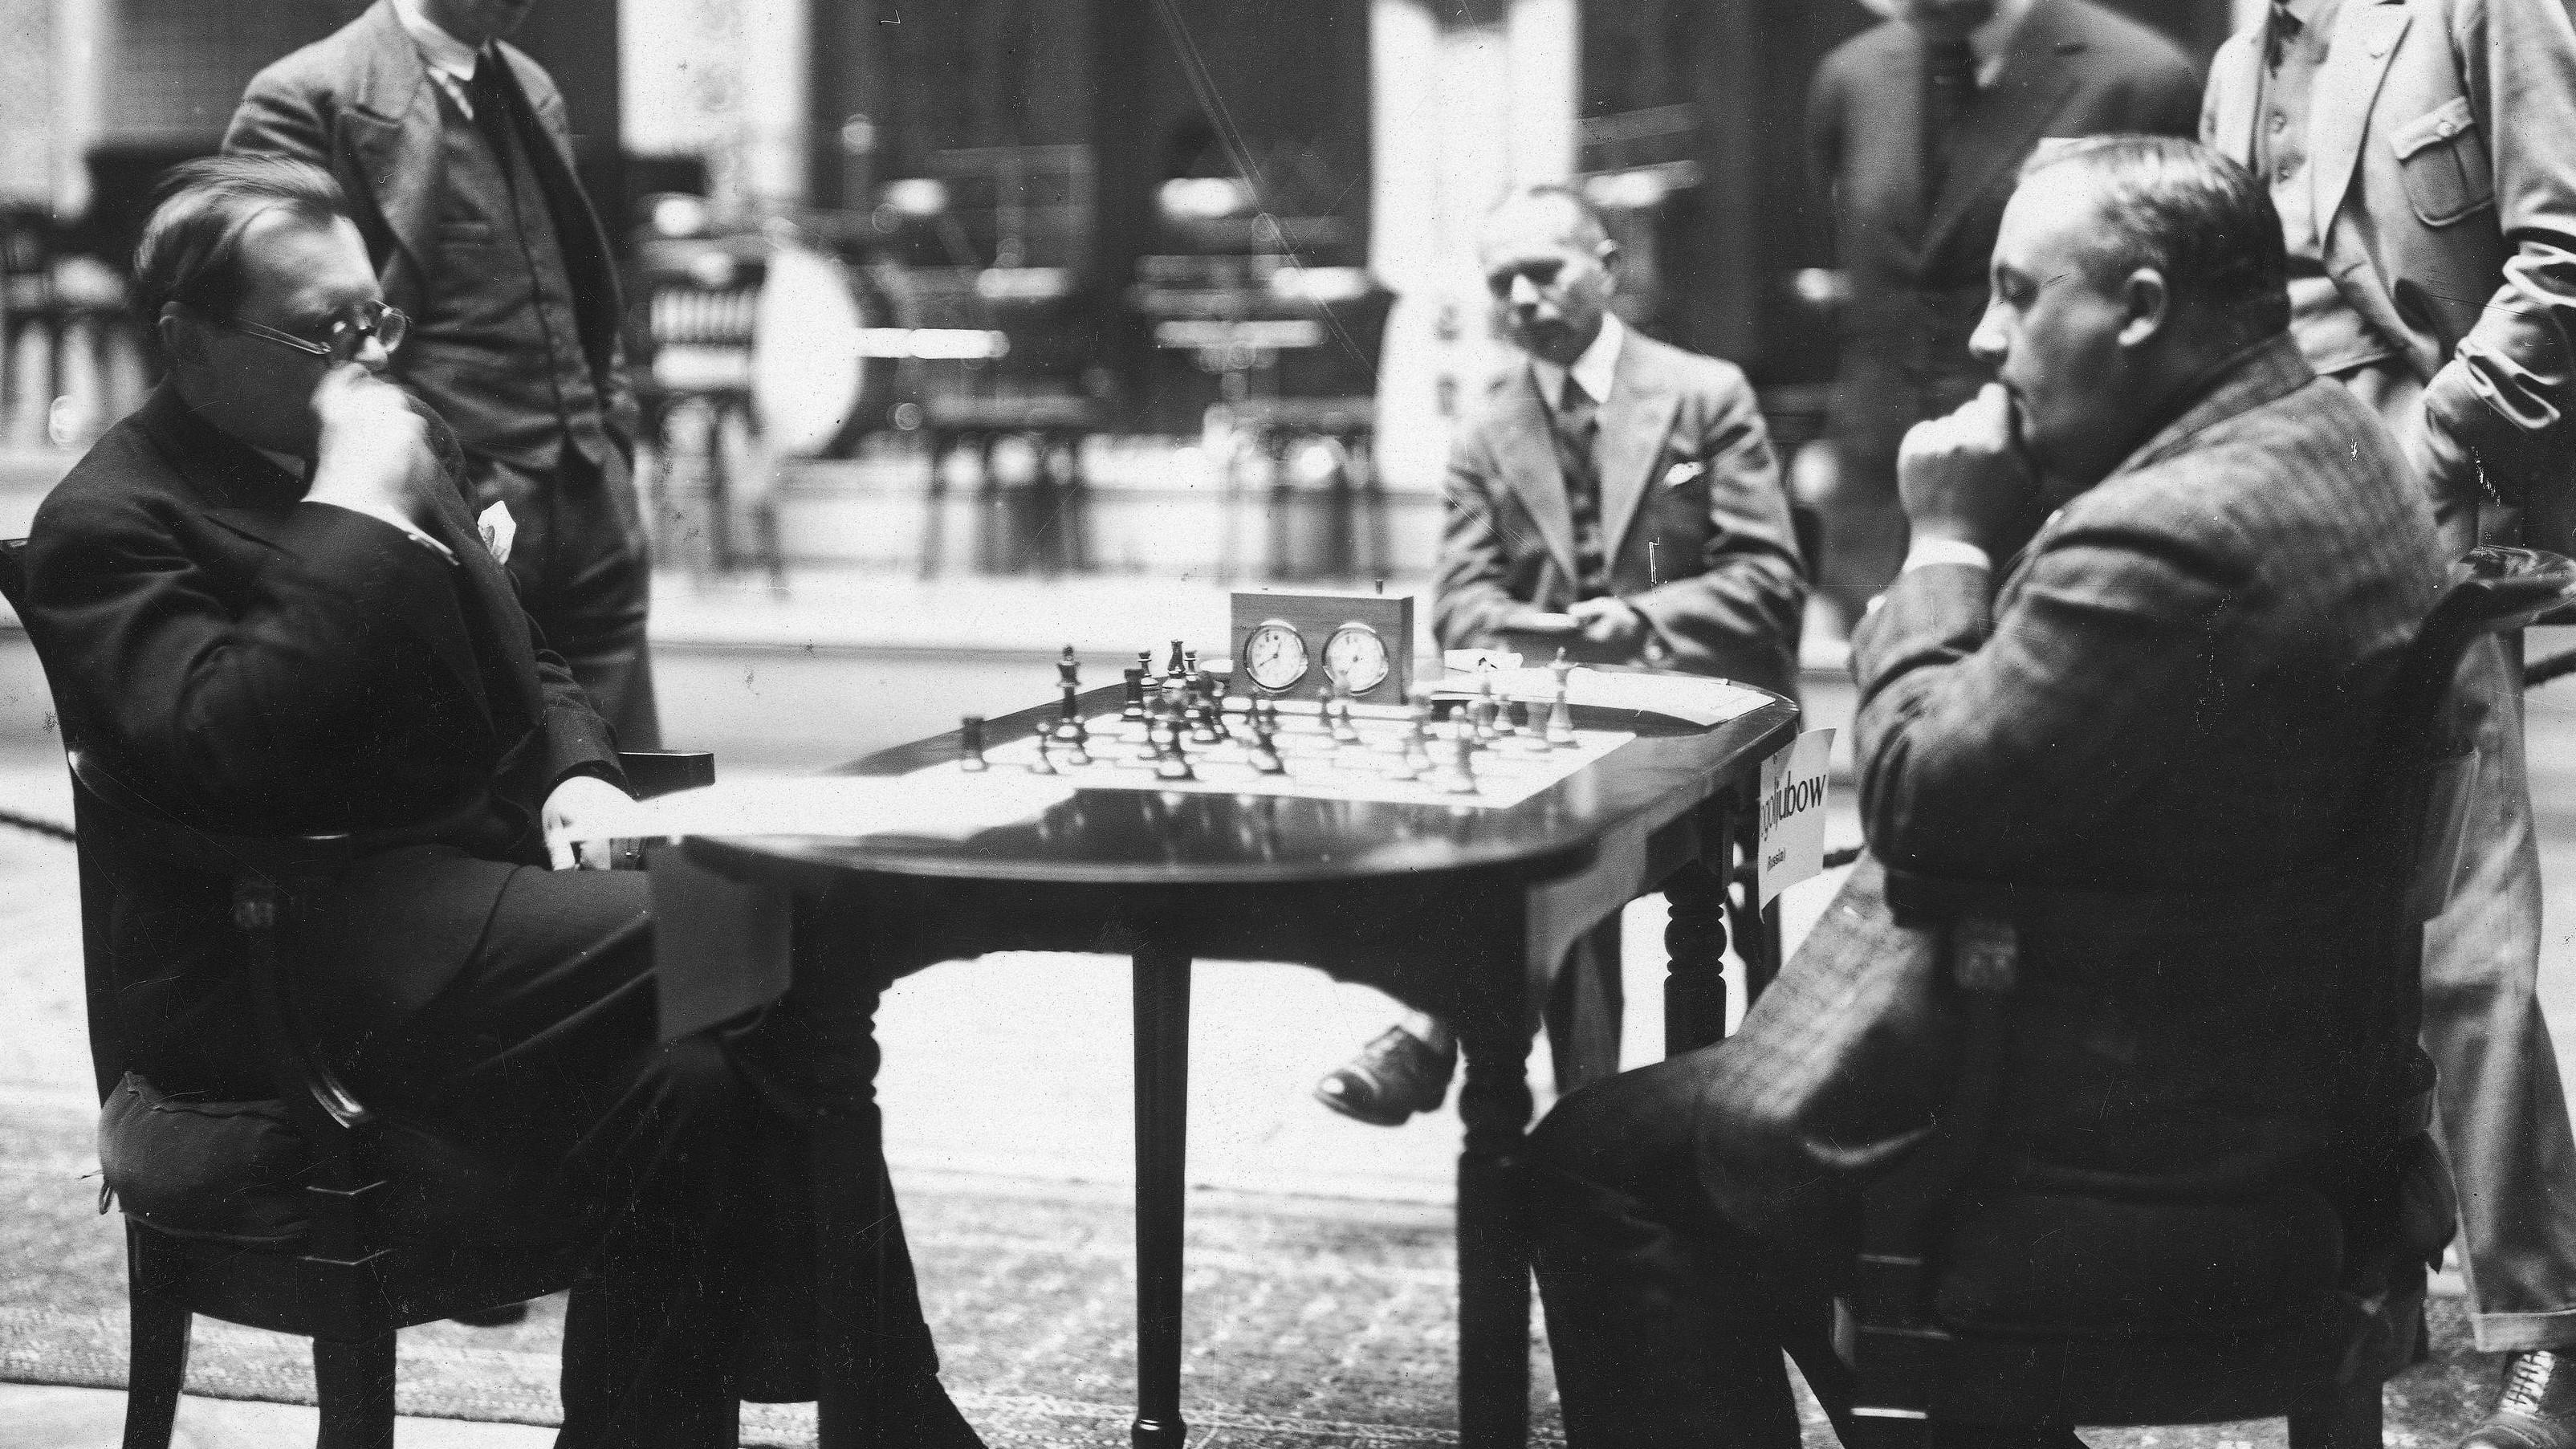 Alexander Alekhine: Top 14 Amazing Chess Sacrifices of all time! 